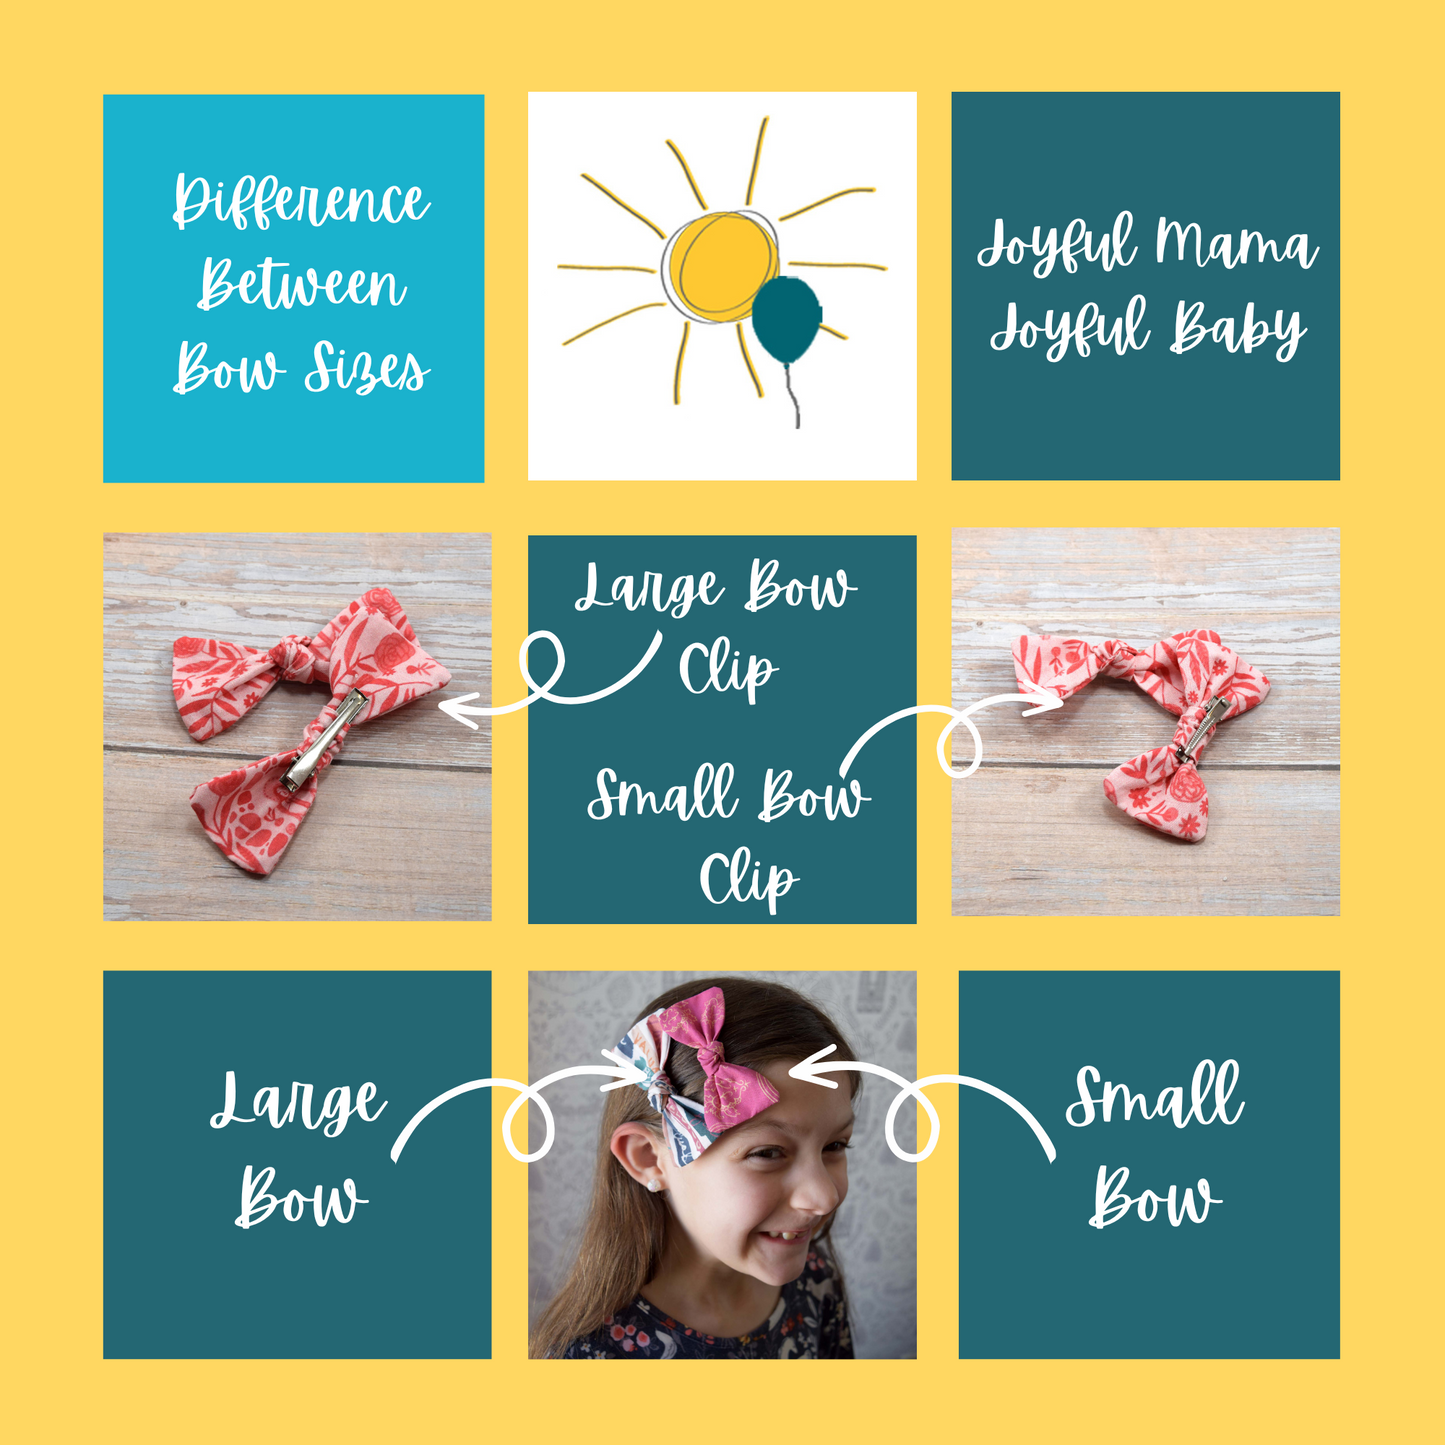 Catholic Knotted Hair Bows - Affirmations